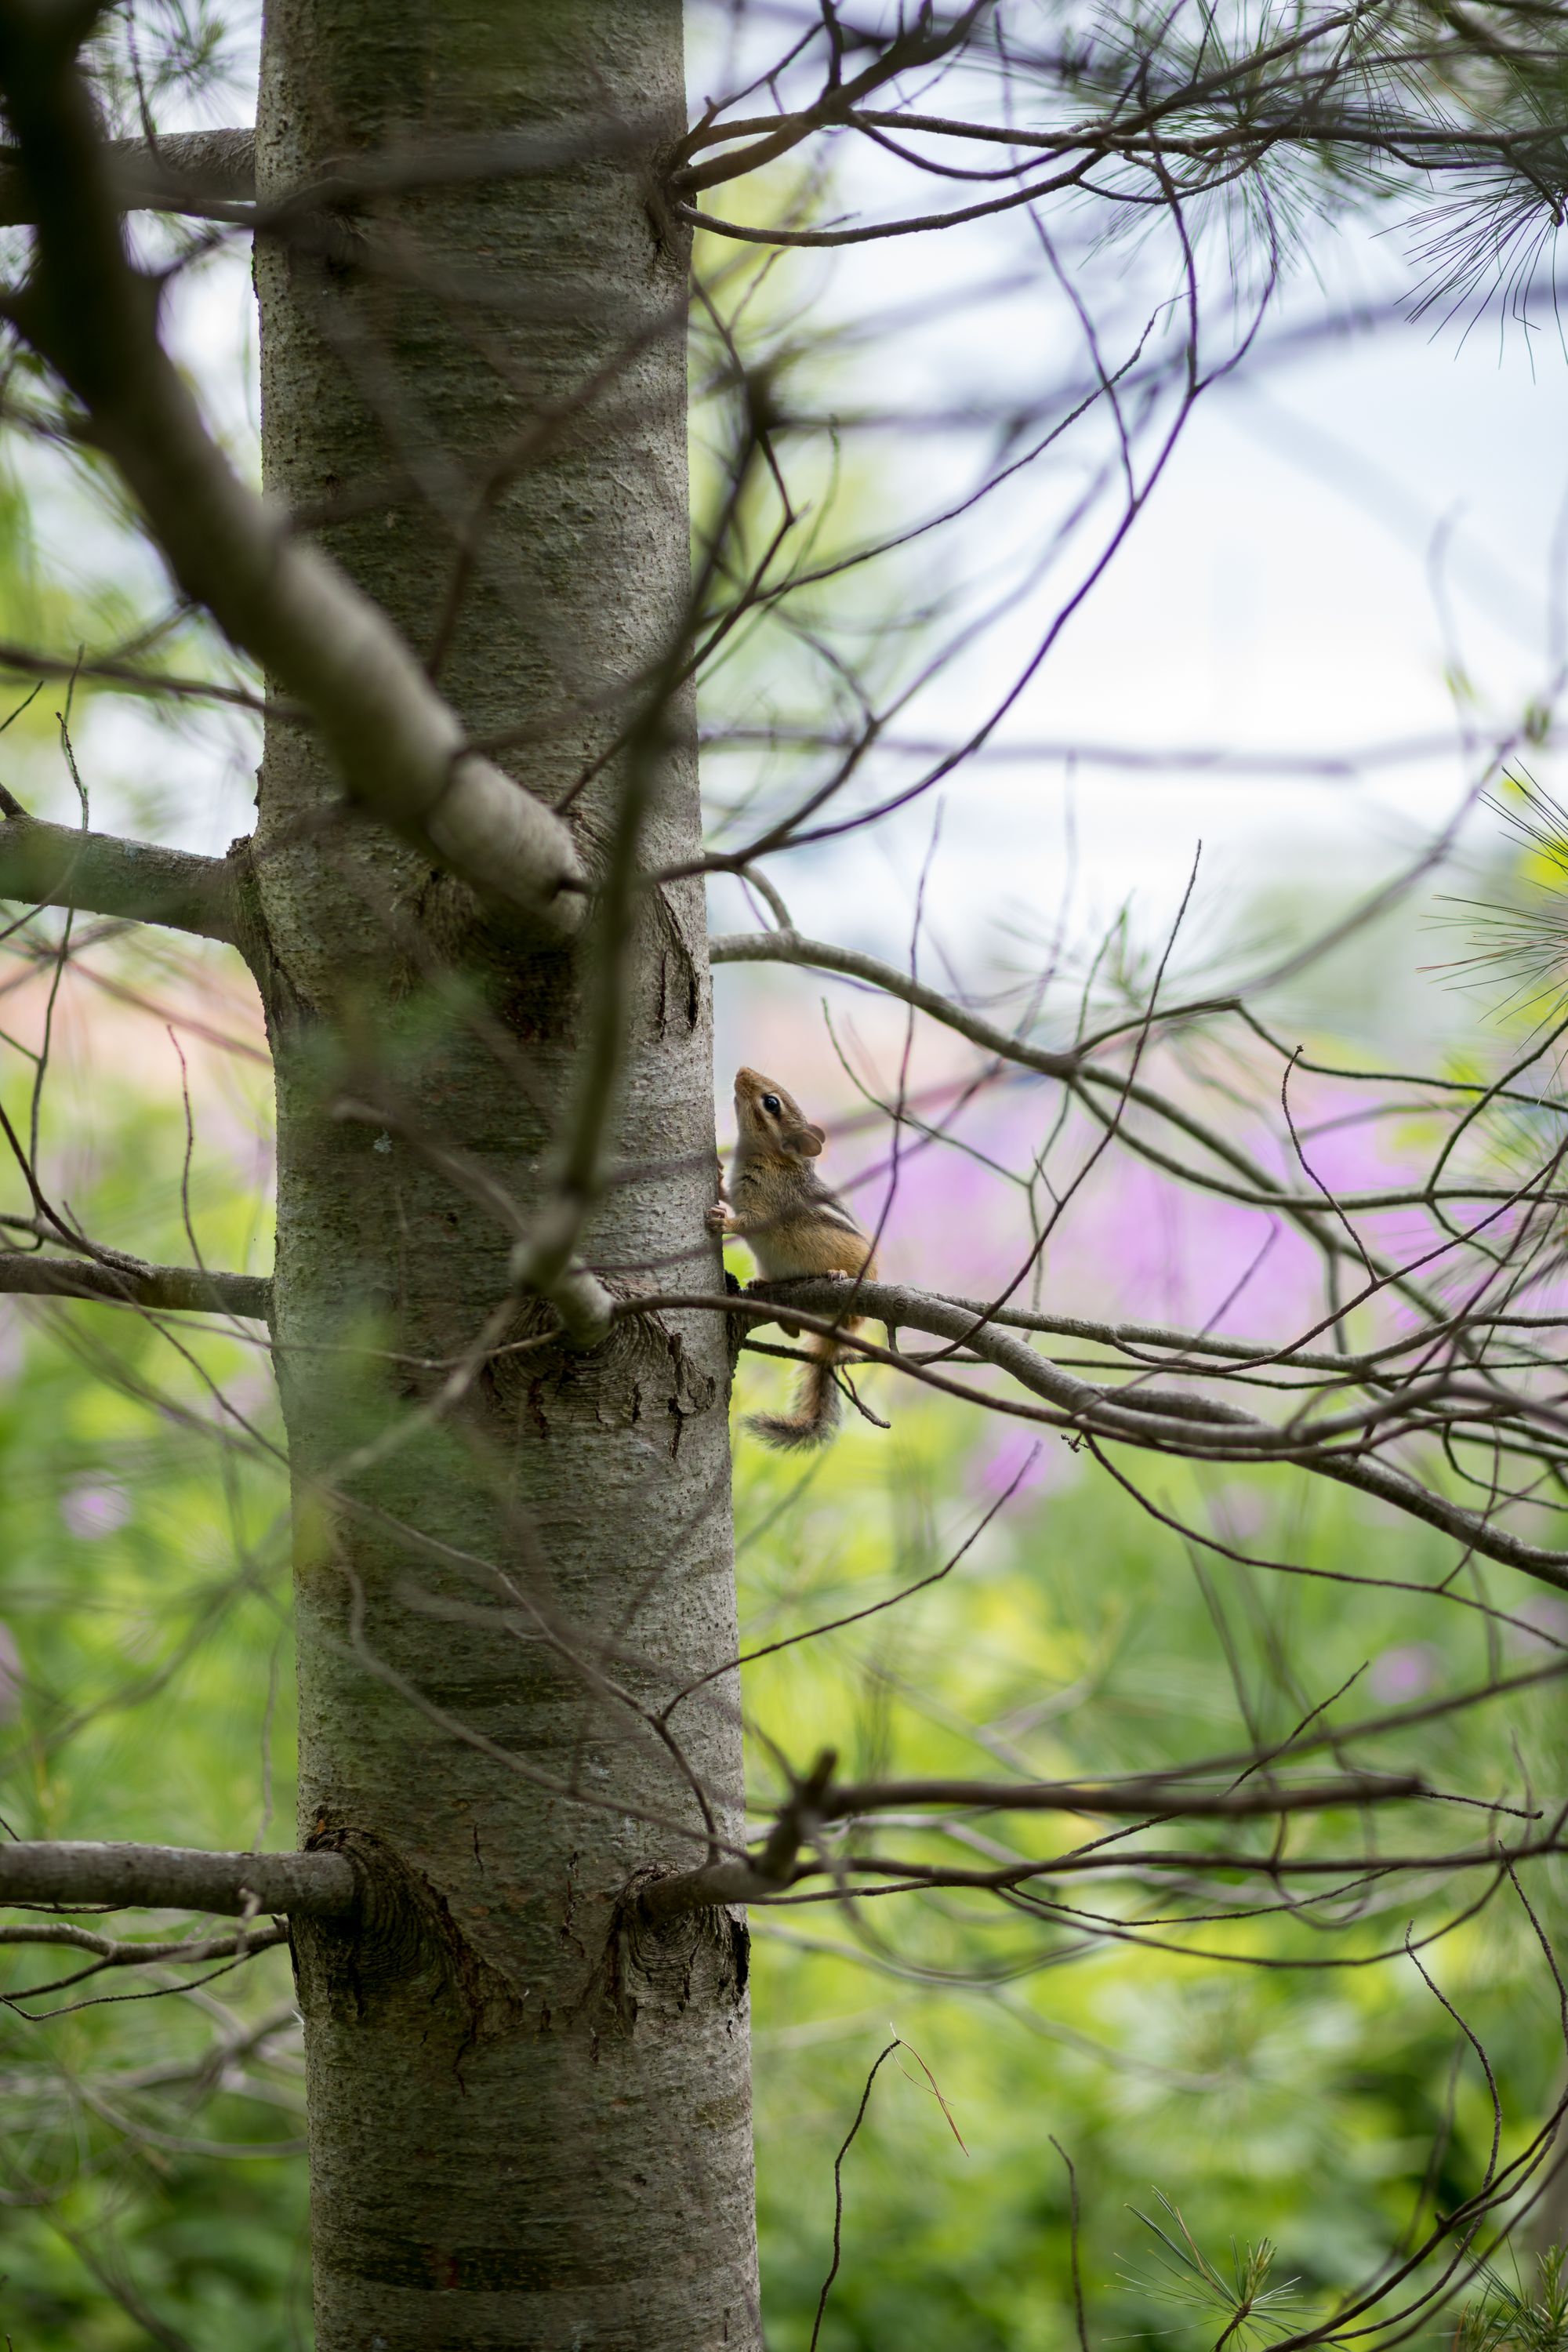 85mm ƒ/1.8 shot at ƒ/2.2 at 1/1,320th, ISO 100. This is a great example of the kind of shot I was able to grab with the back-button focus options I’d set up. I was shooting the purple flowers behind the tree when this chipmunk showed up, and I was able to track him as he climbed, firing this shot as he paused to look at me.